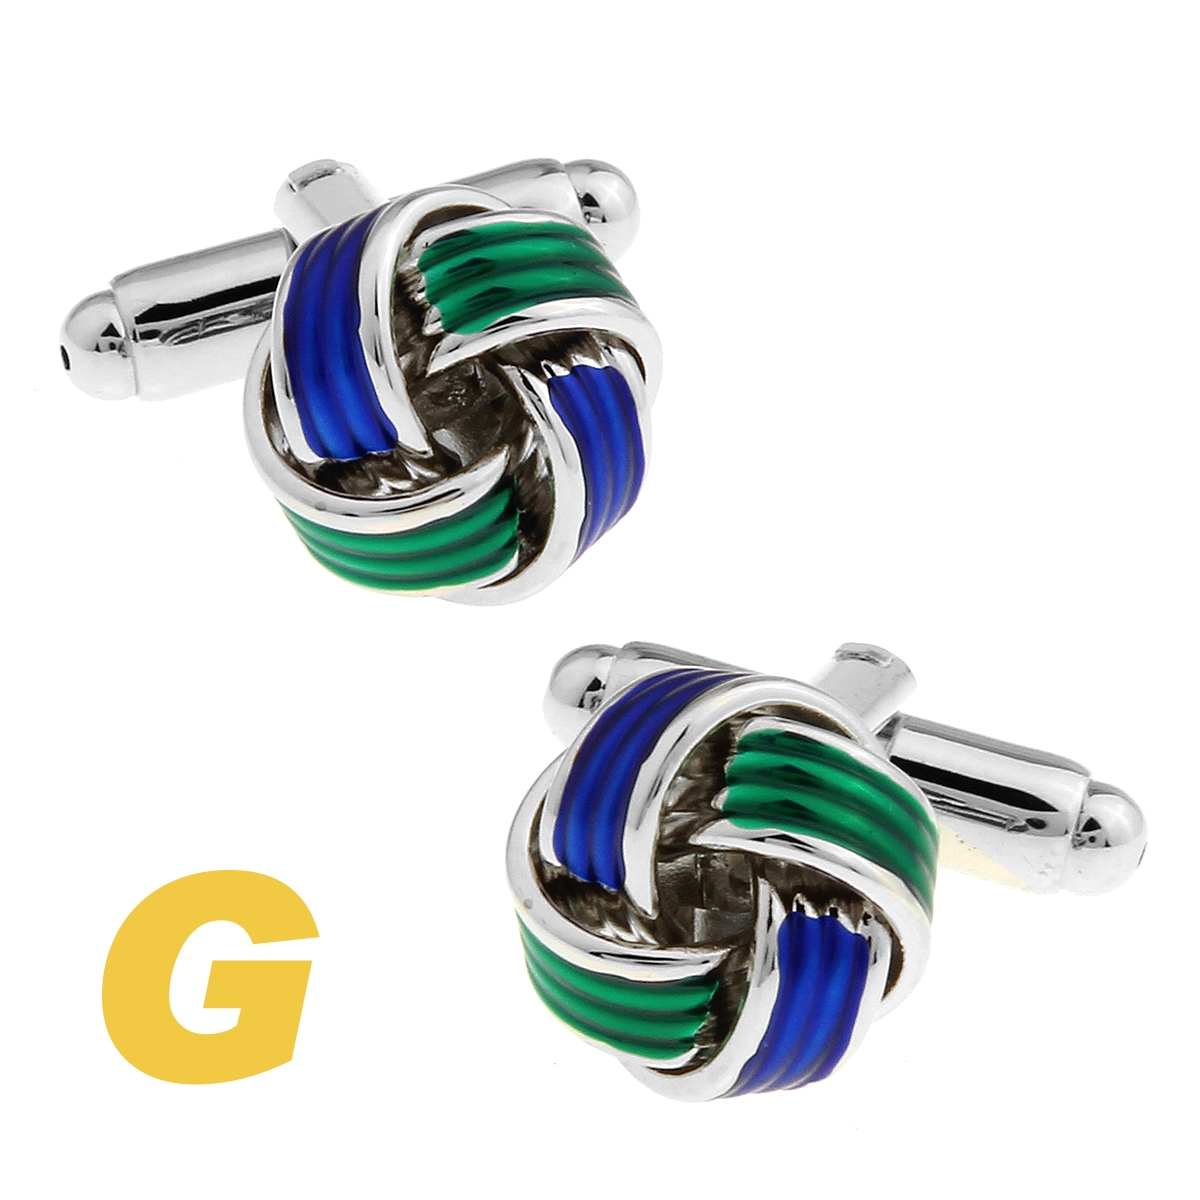 Mens Wedding Cufflinks Novelty Colorful Spiral Knot & Clean Cloth 165657 - Picture 1 of 1